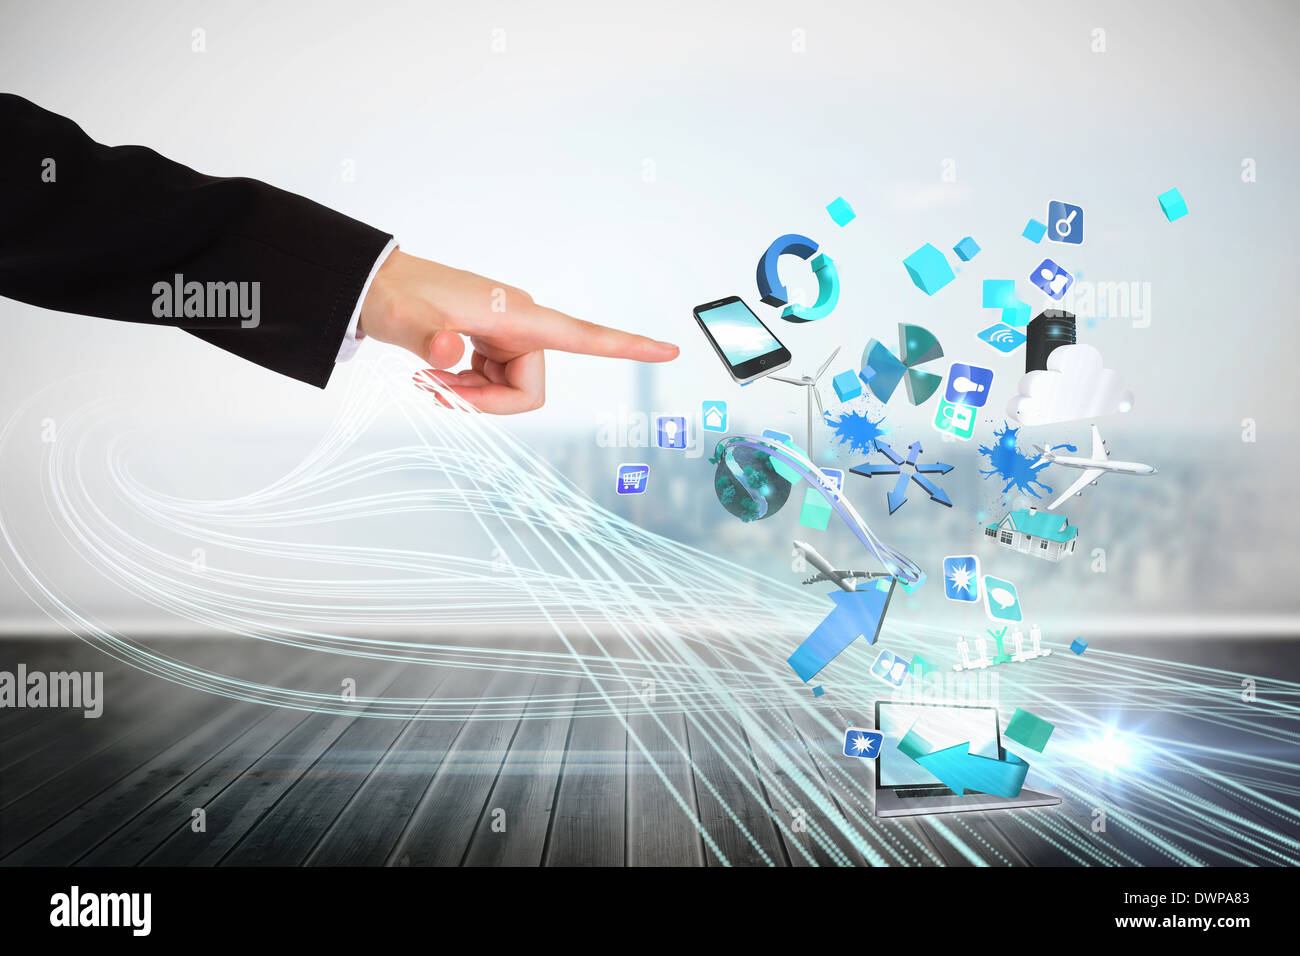 Finger pointing to app icons with laptop Stock Photo